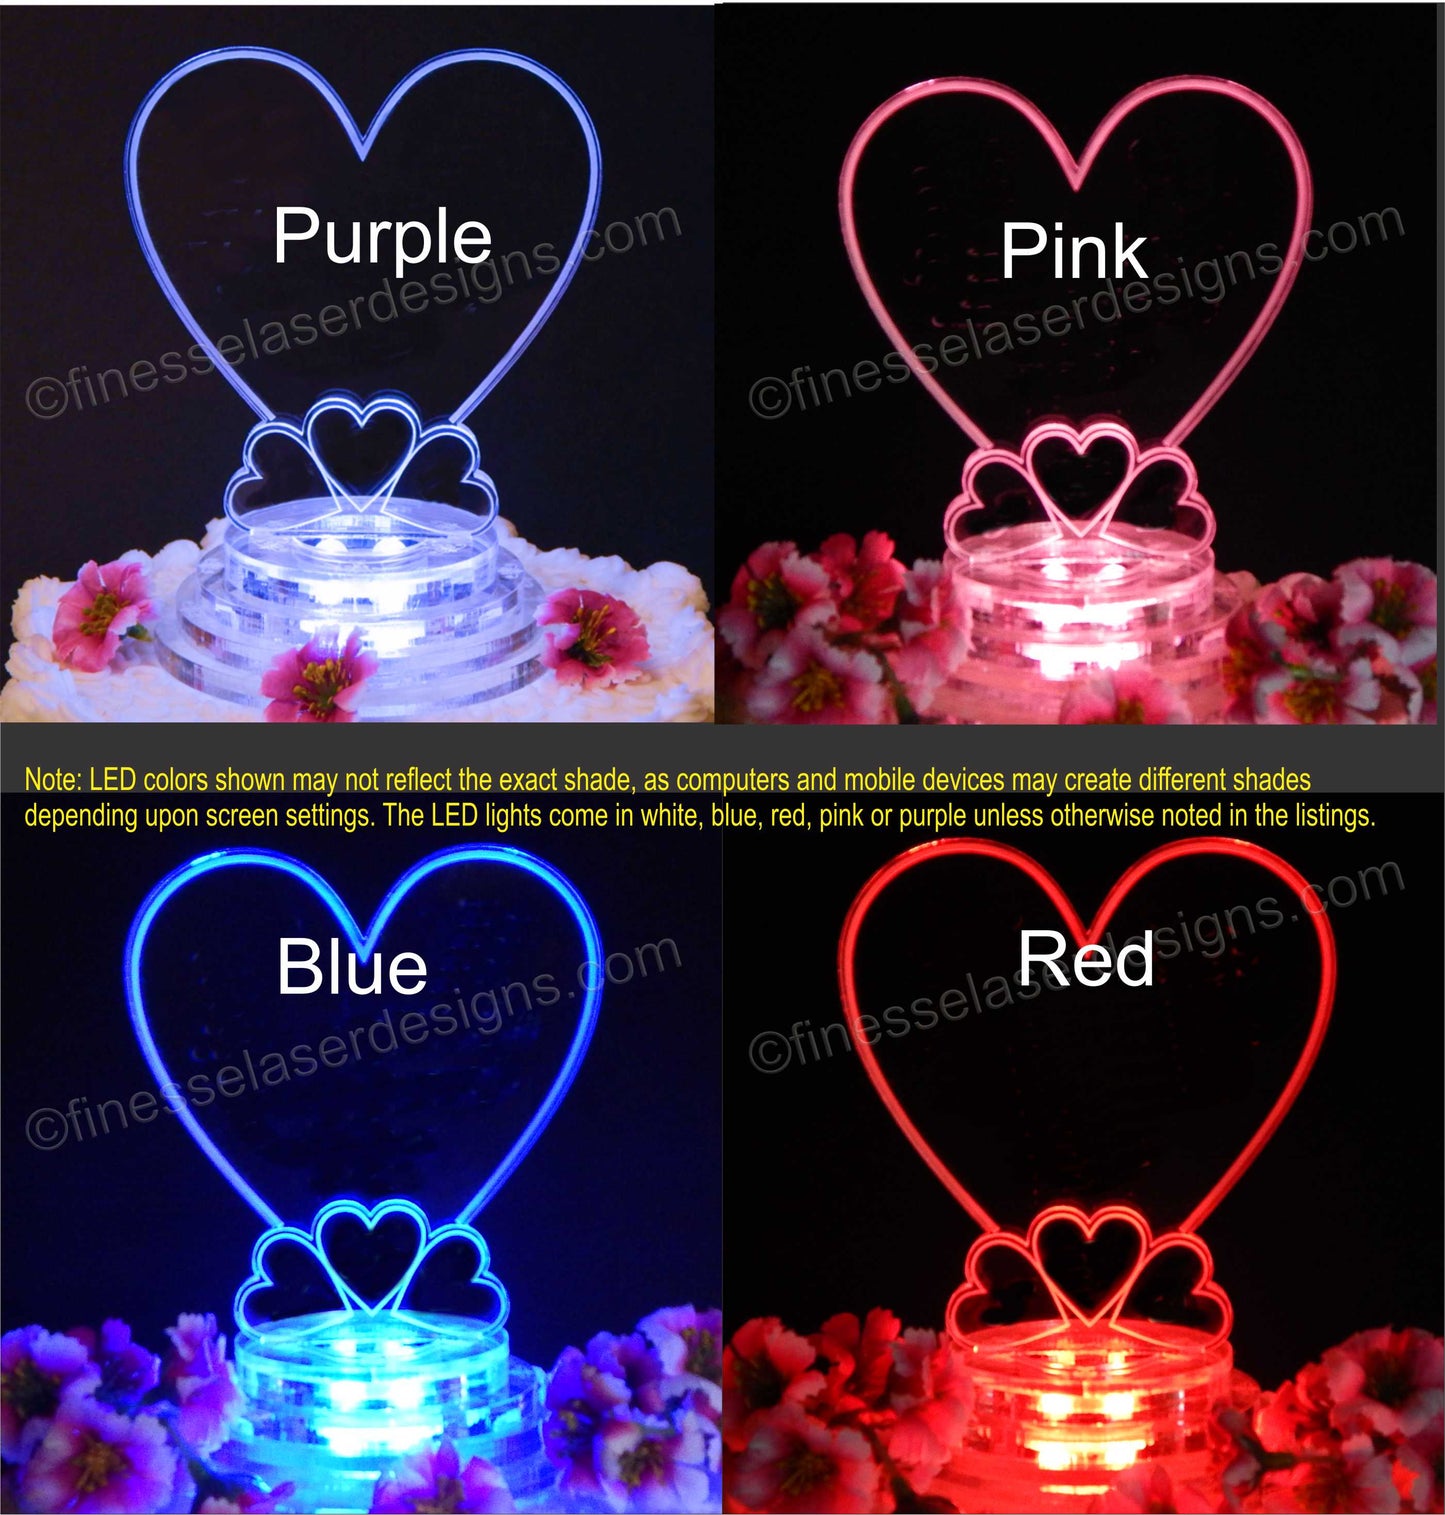 4 views of a lighted heart shaped cake topper shown in purple, pink, blue and red